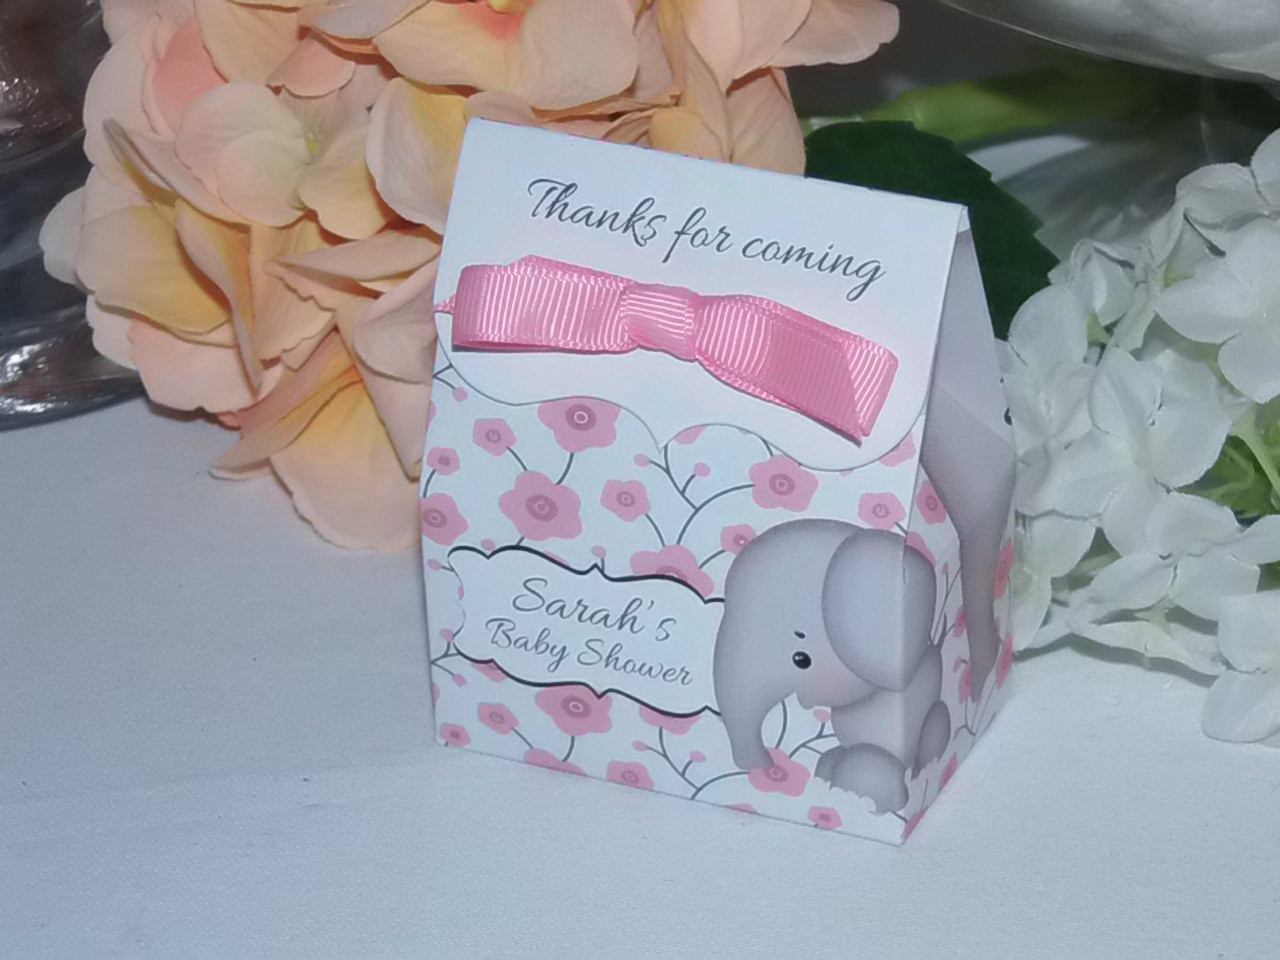 Personalized Baby Shower Gift Bags
 Elephant Favor Bags Personalized Baby Shower Favors Pink